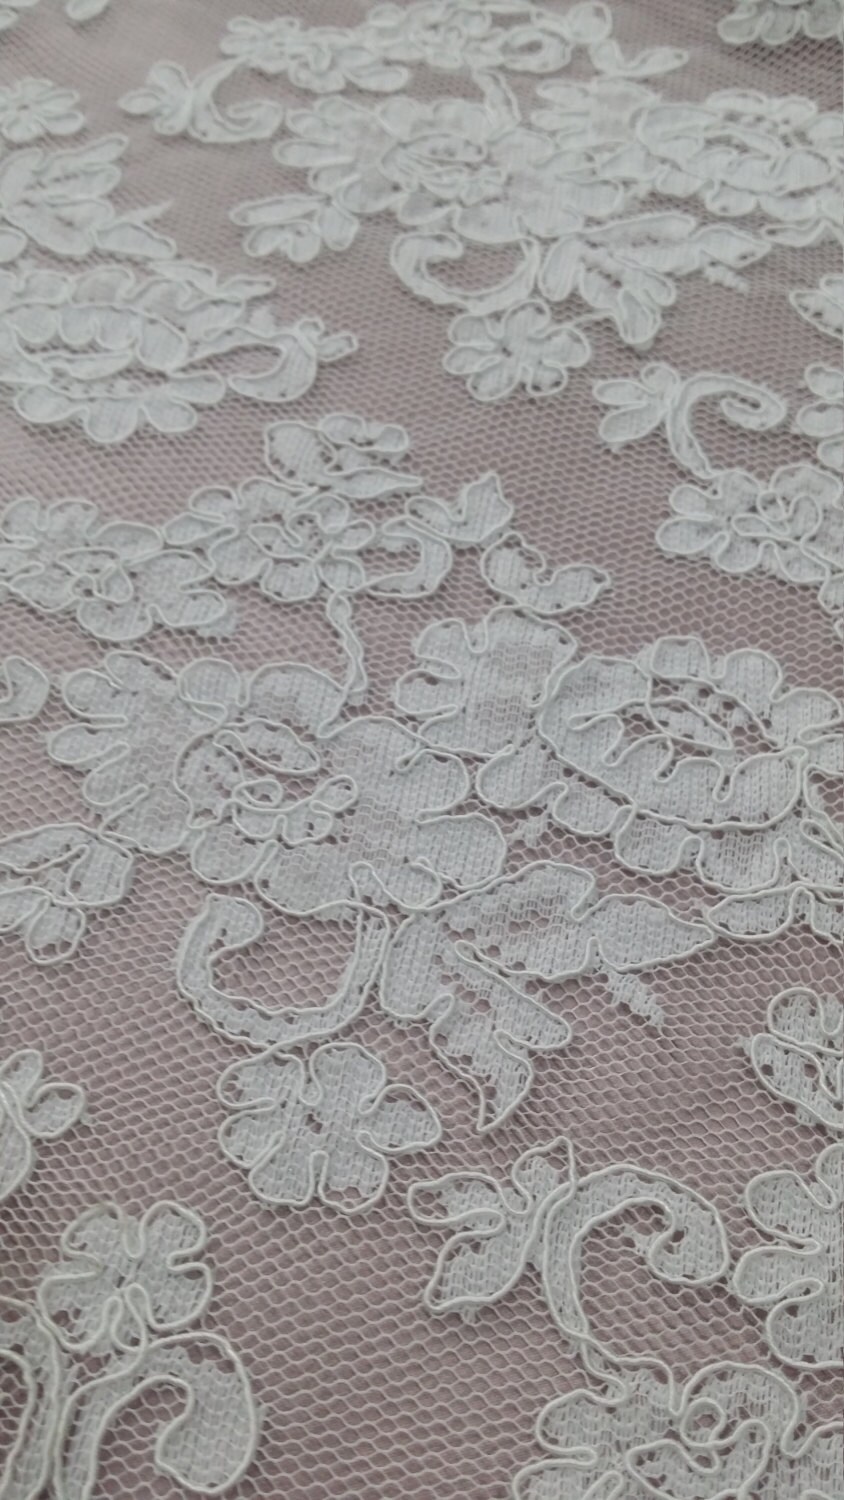 Ivory Lace Fabric by the Yard French Lace Embroidered Lace | Etsy